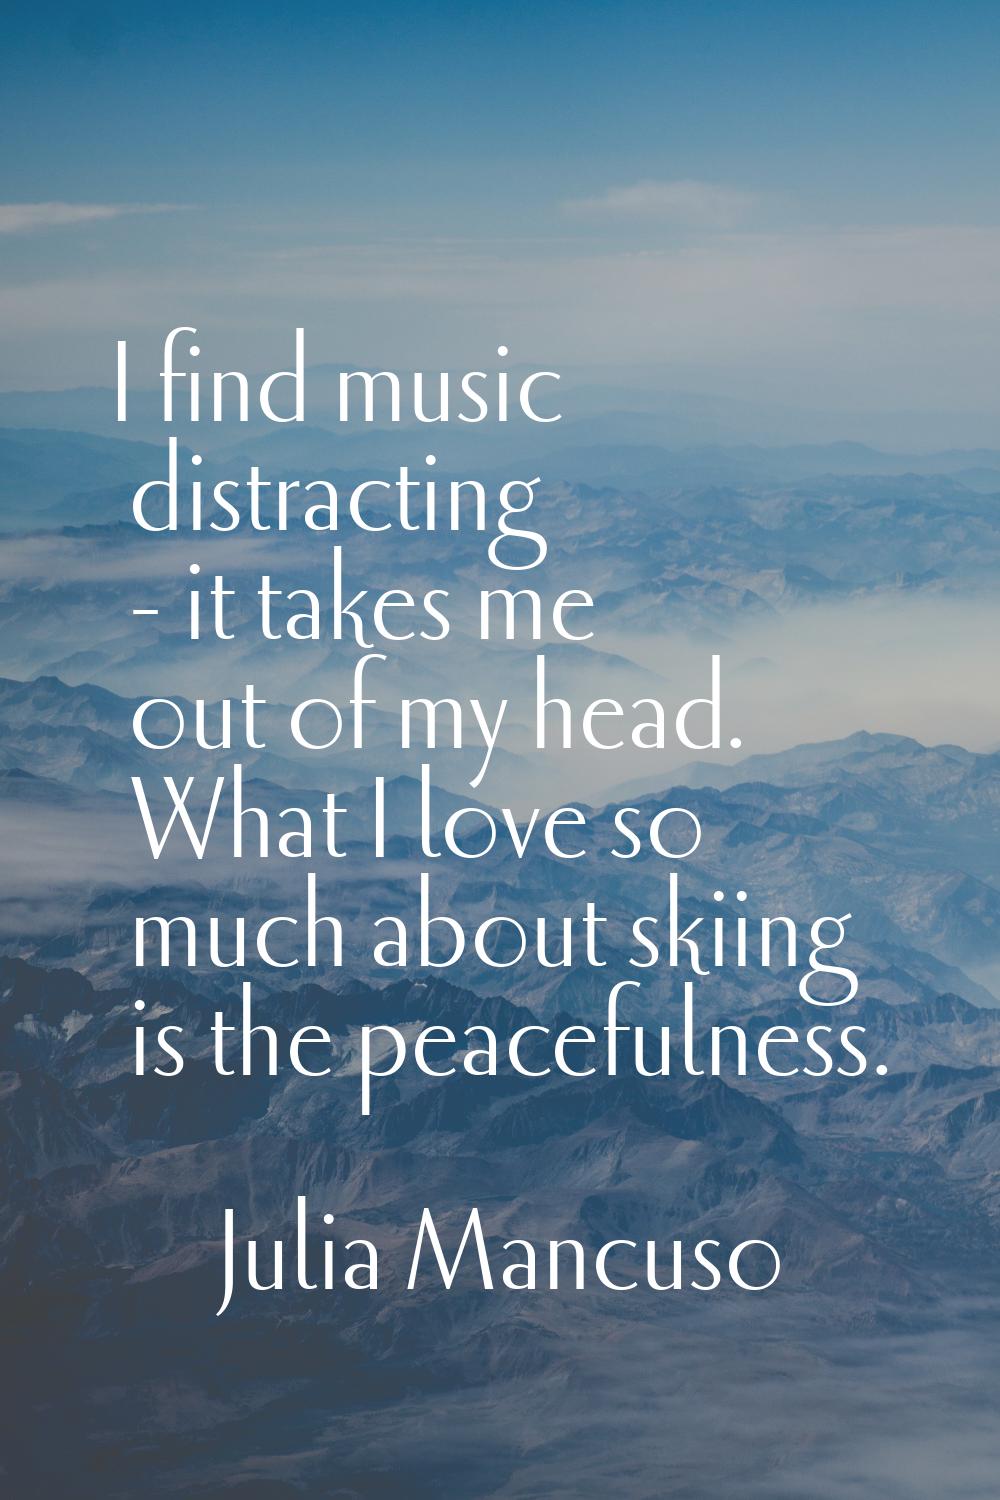 I find music distracting - it takes me out of my head. What I love so much about skiing is the peac